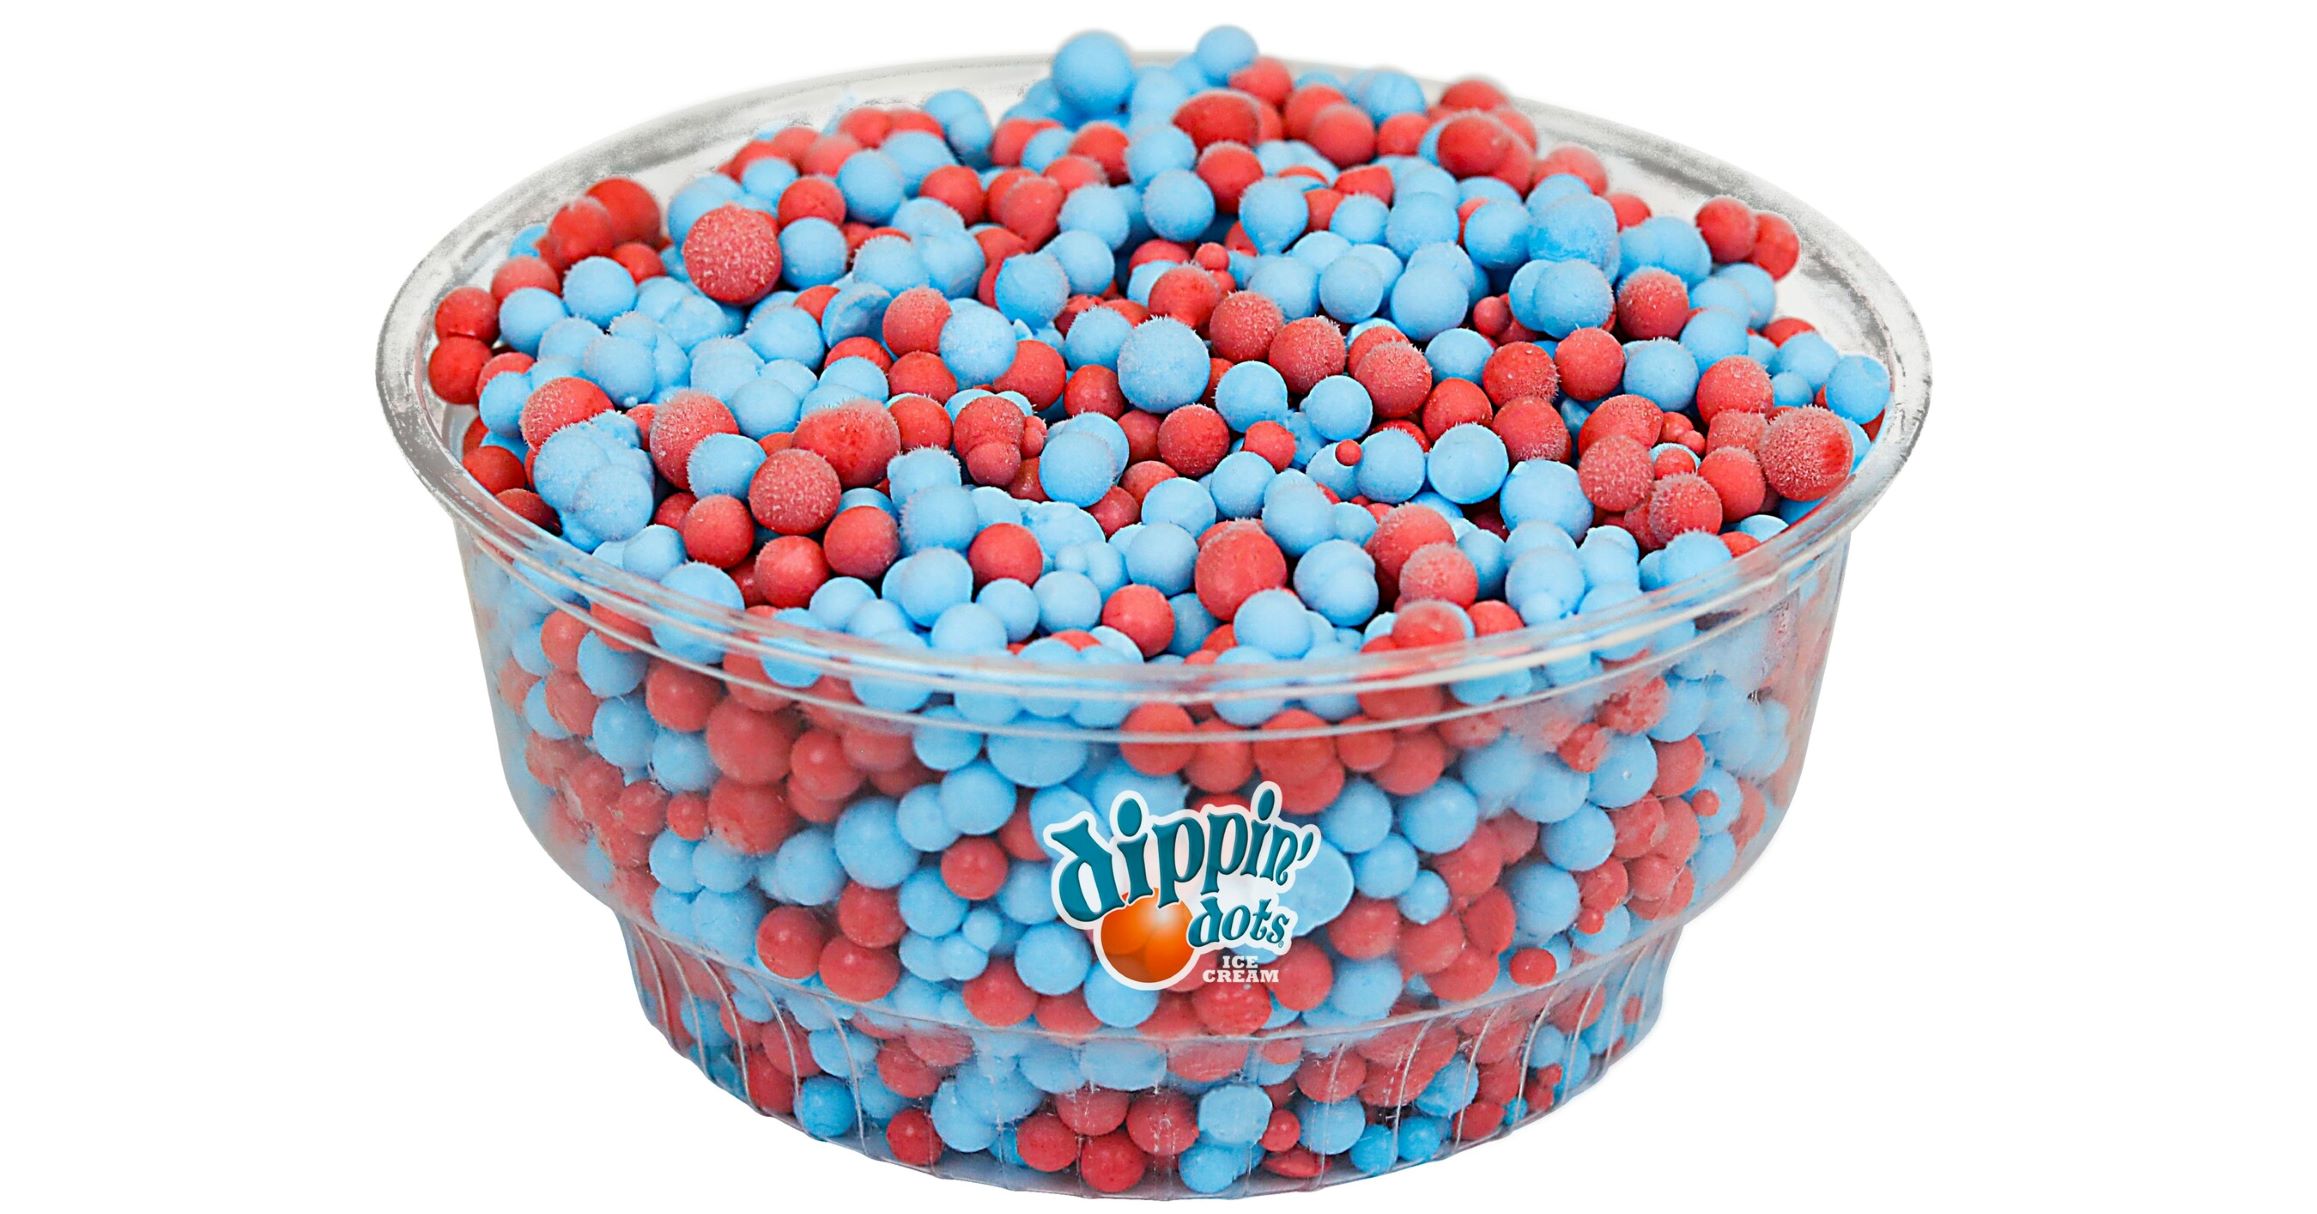 10 Dippin Dots Nutrition Facts - Facts.net